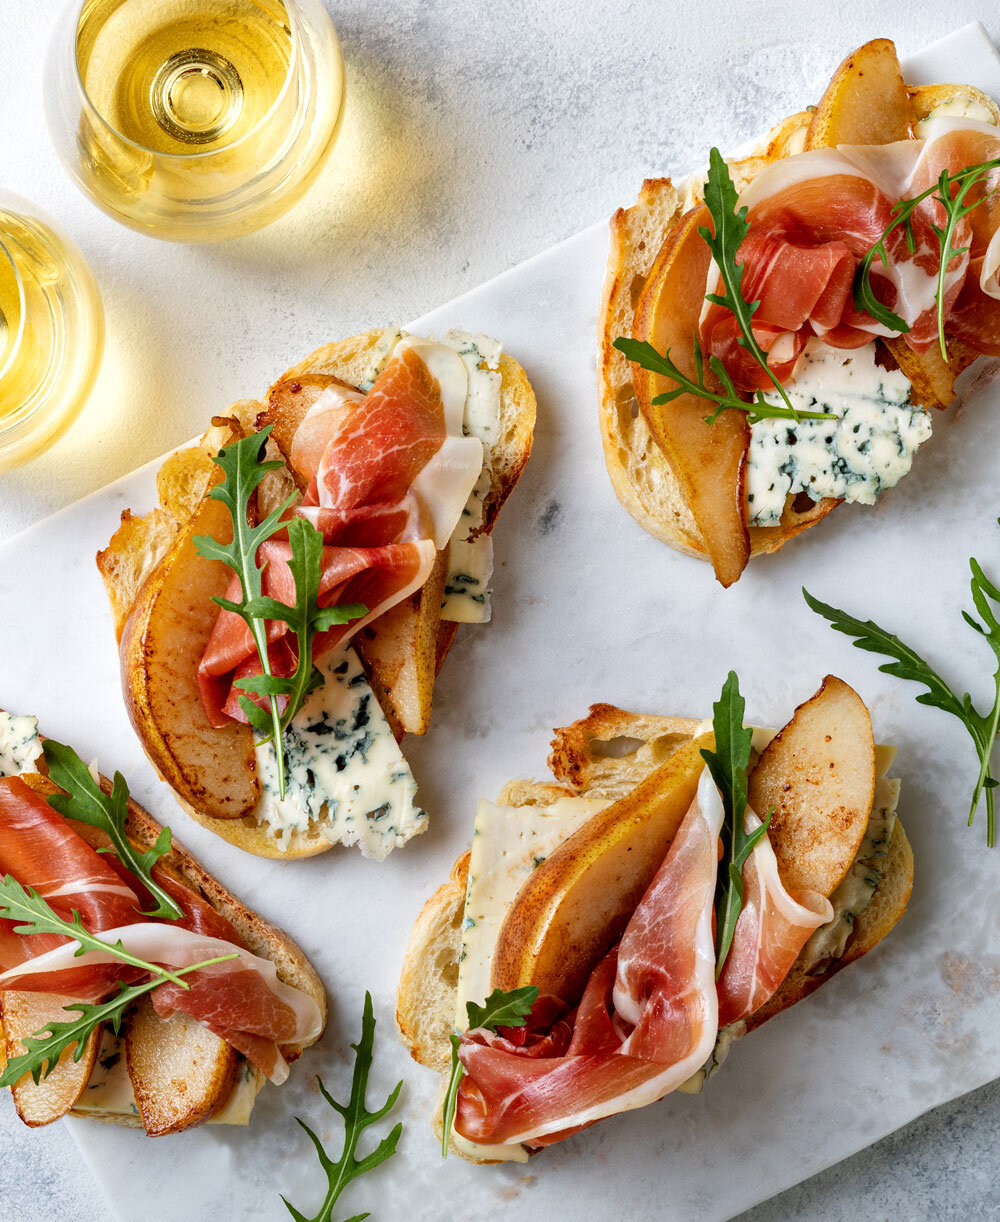 Flat lay of crostini appetizers with blue cheese, caramelized pears, prosciutto, and arugula, catered by Joel Catering, New Orleans' elite catering service